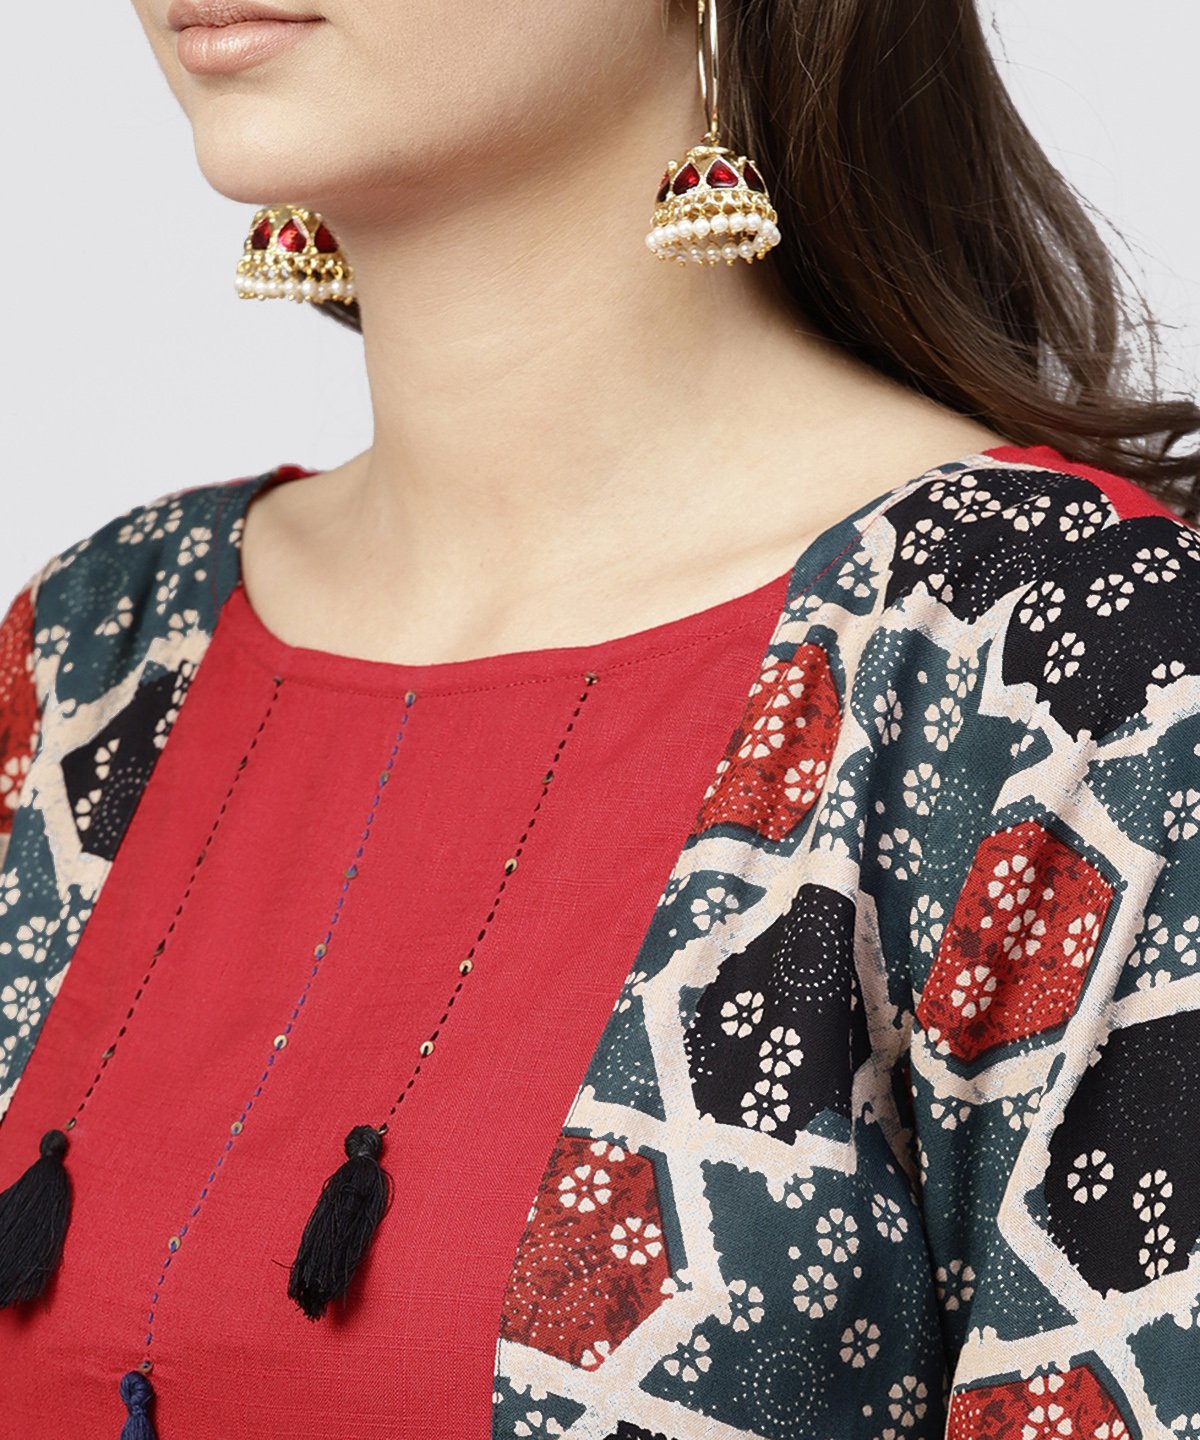 Women's Red Cotton Full Sleeves Kurti With An Attached Jacket And Emblished With Thread Work And Tassel - Nayo Clothing